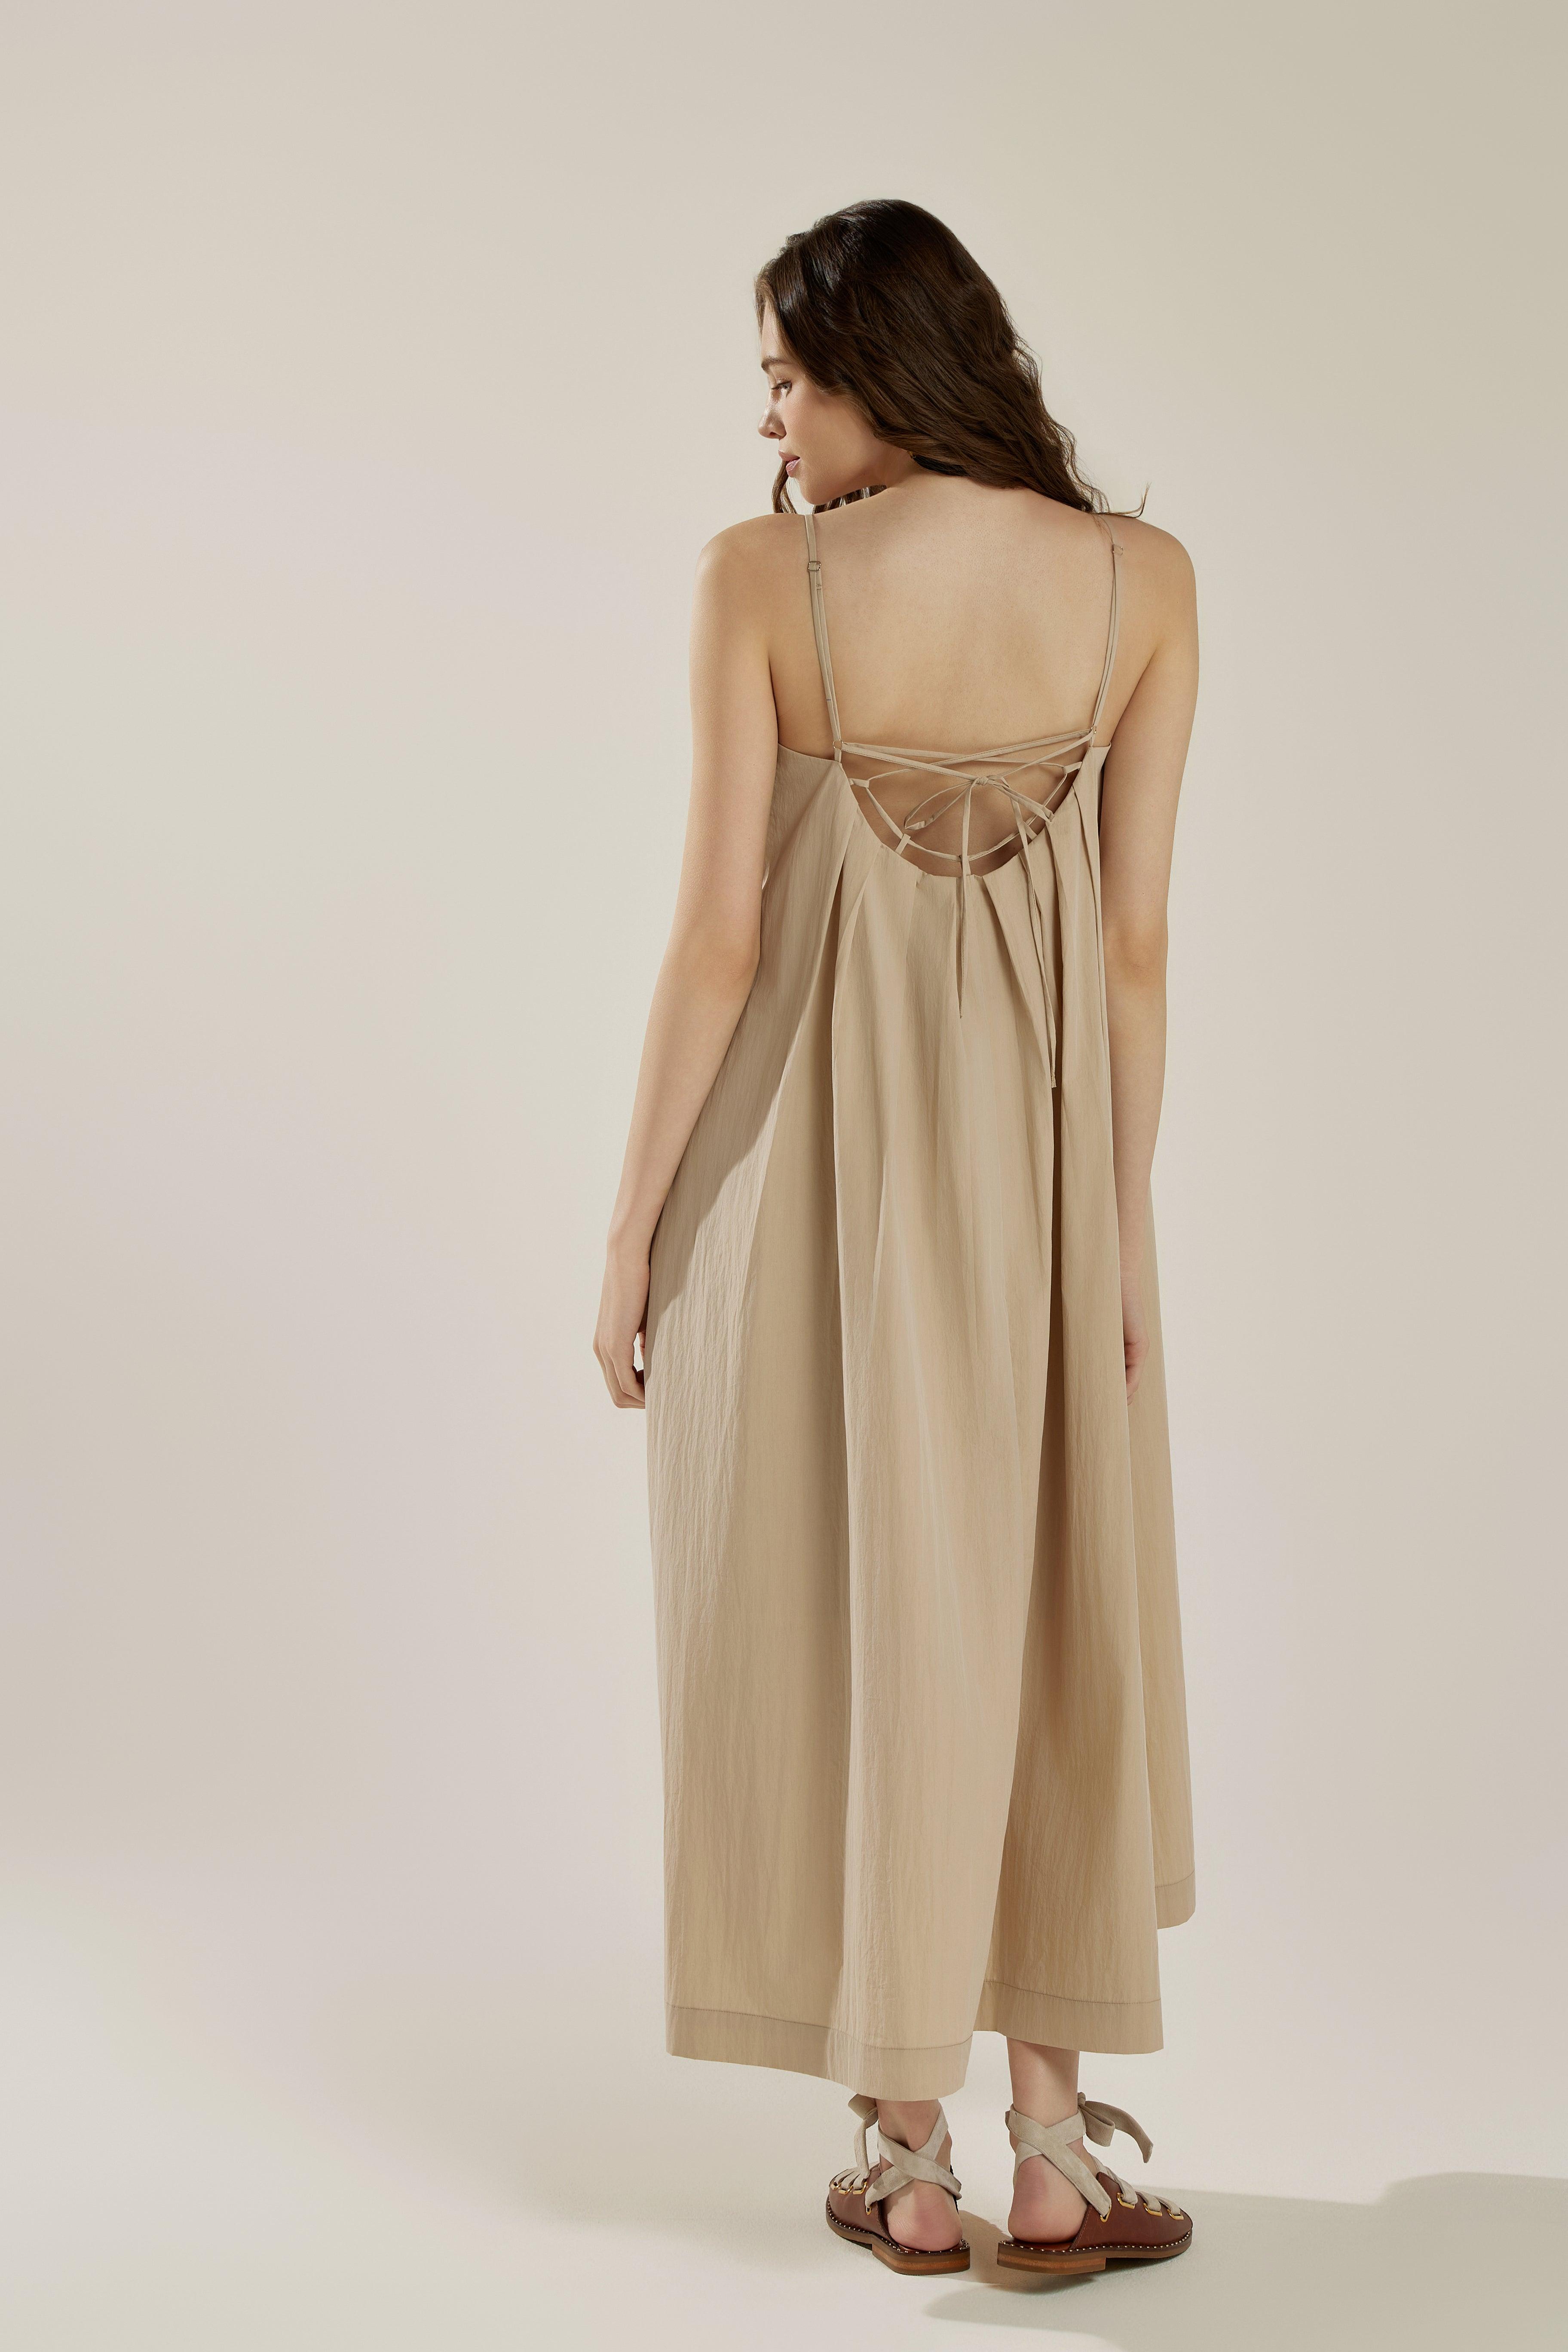 Sleeveless Tuck Detail Maxi Dress with tie back - Taupe - noflik